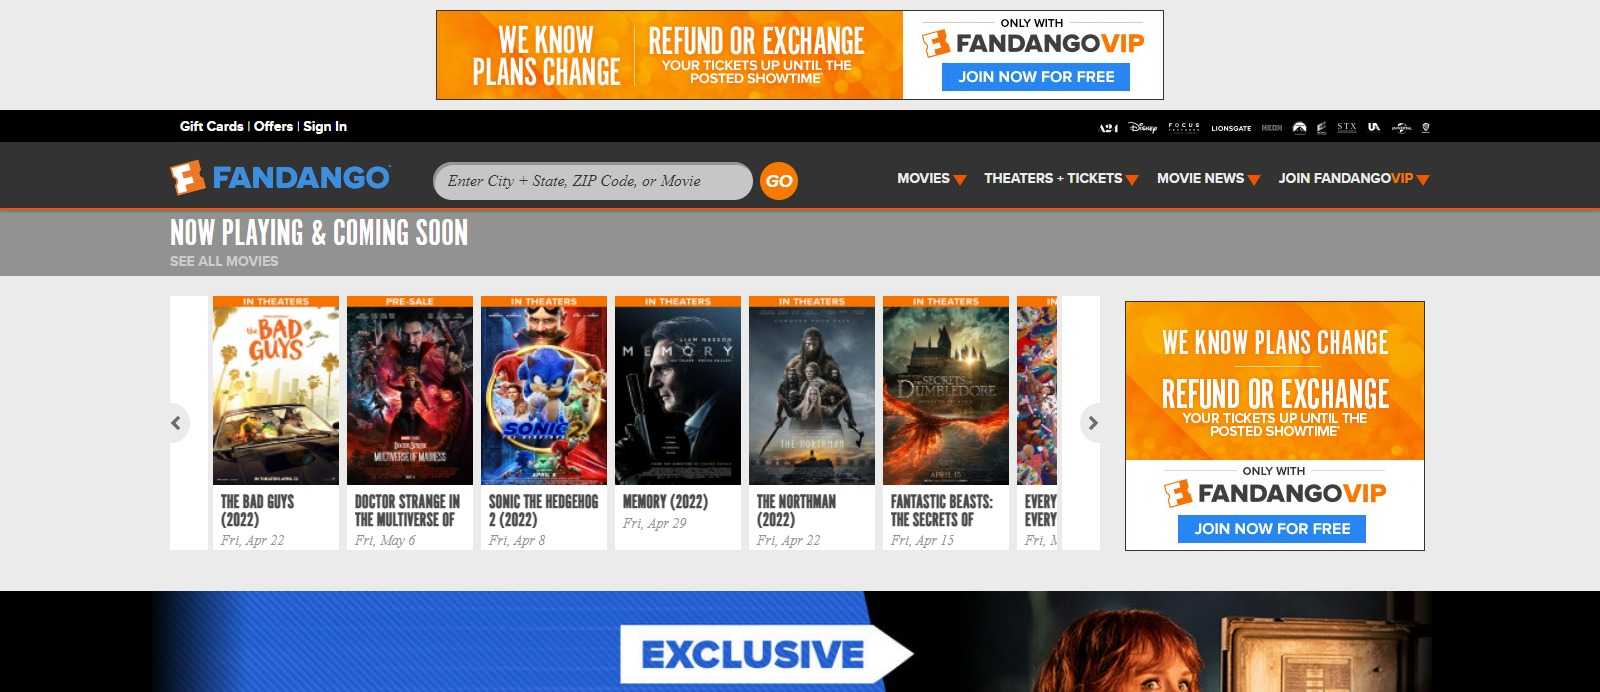 Fandango Affiliates Program Review: Starts at $0.1 Commission For every movie ticket